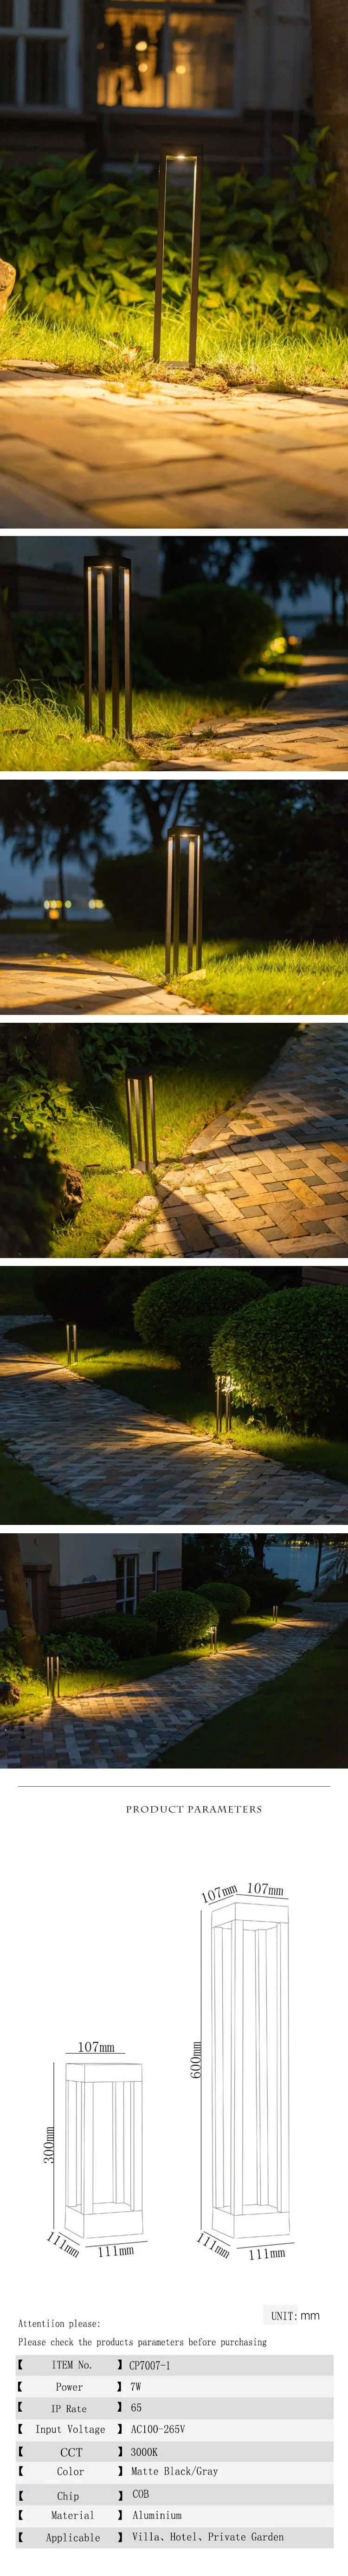 Ning Bo Pathway Outdoor Walkway up and Down E27 Landscape Vintage Wall Lamp out Door Decoration Luminous Ball LED Lights Garden Art Solar Lighting